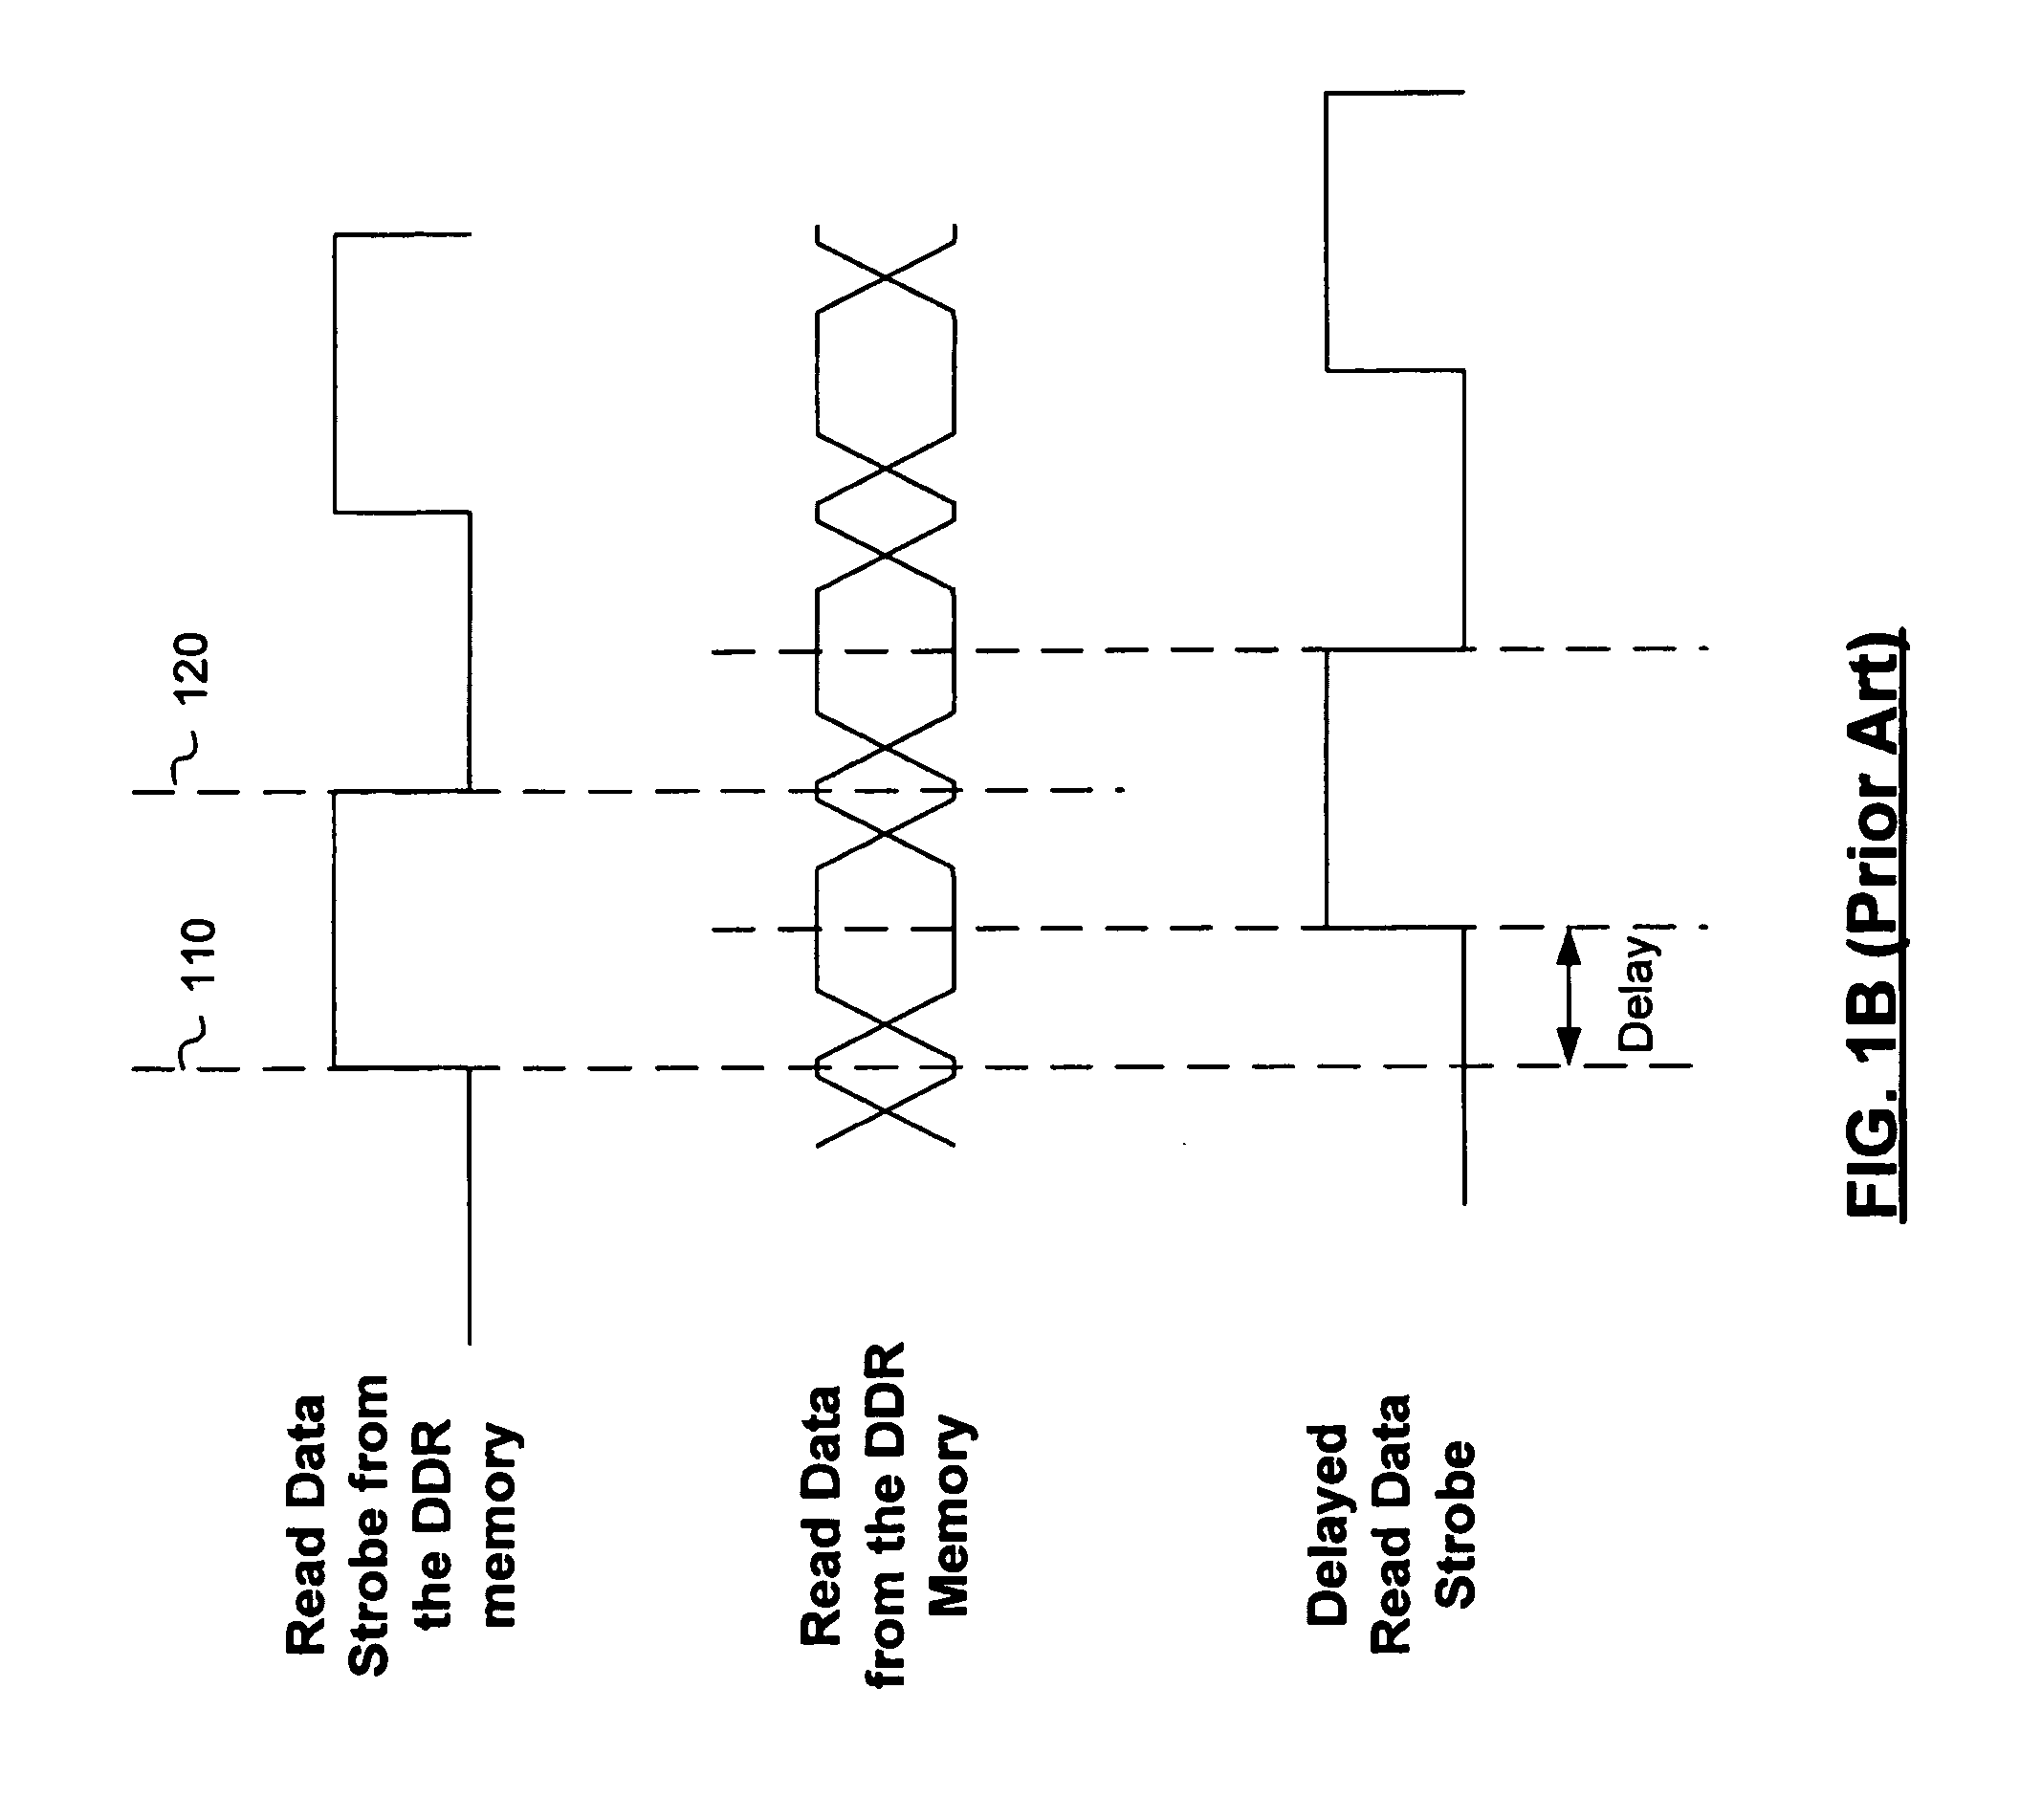 Input/output cells for a double data rate (DDR) memory controller